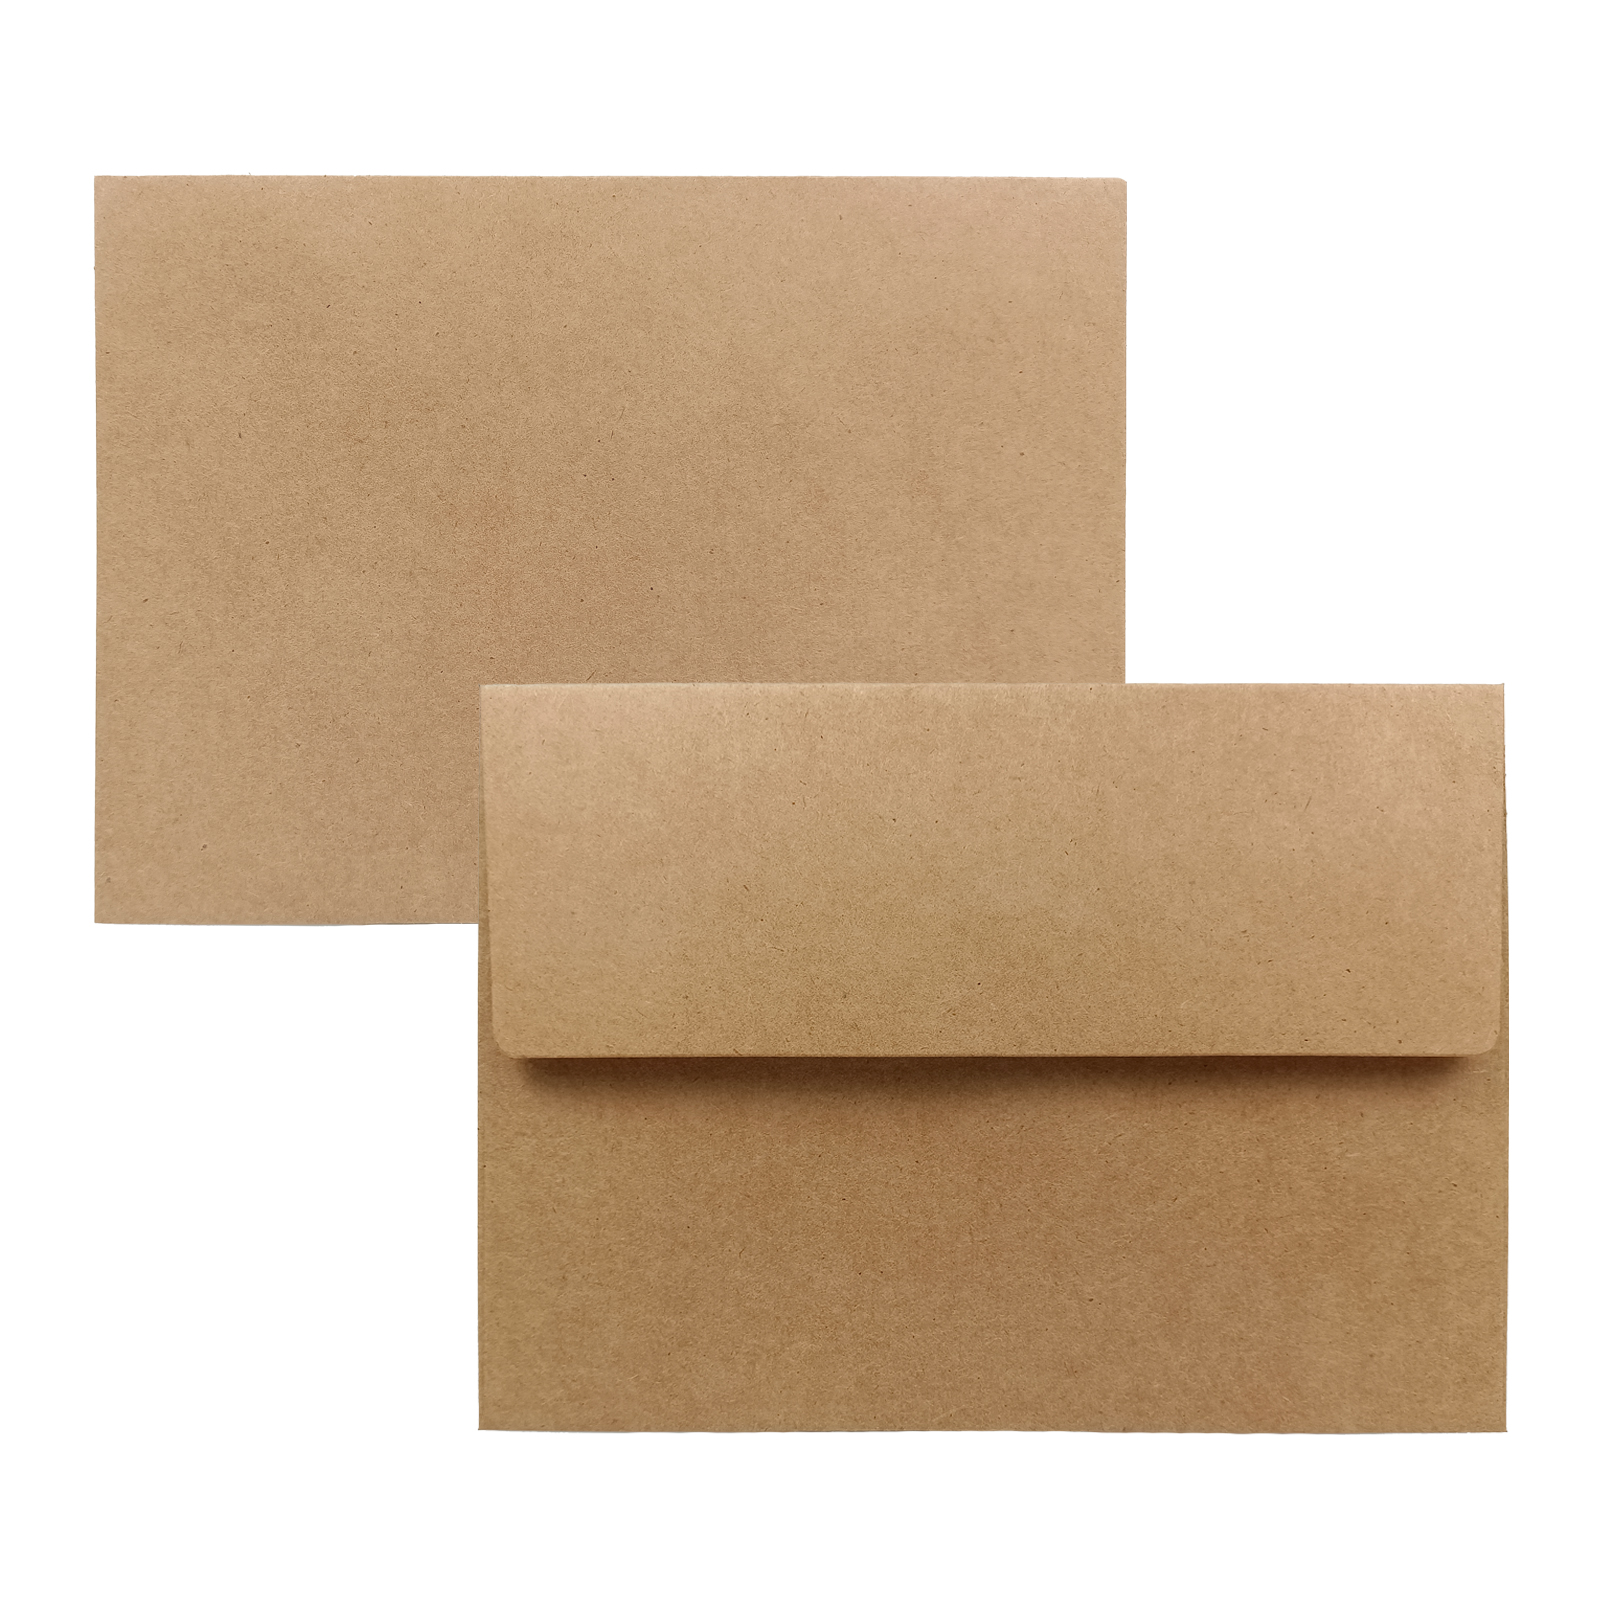 Invitations 100 Pack A7 Brown Kraft Paper Invitation 5 x 7 Envelopes Office Quick Self Seal for 5x7 Cards| Perfect for Weddings Baby Shower| Stationery for General 5.25 x 7.25 Inches 